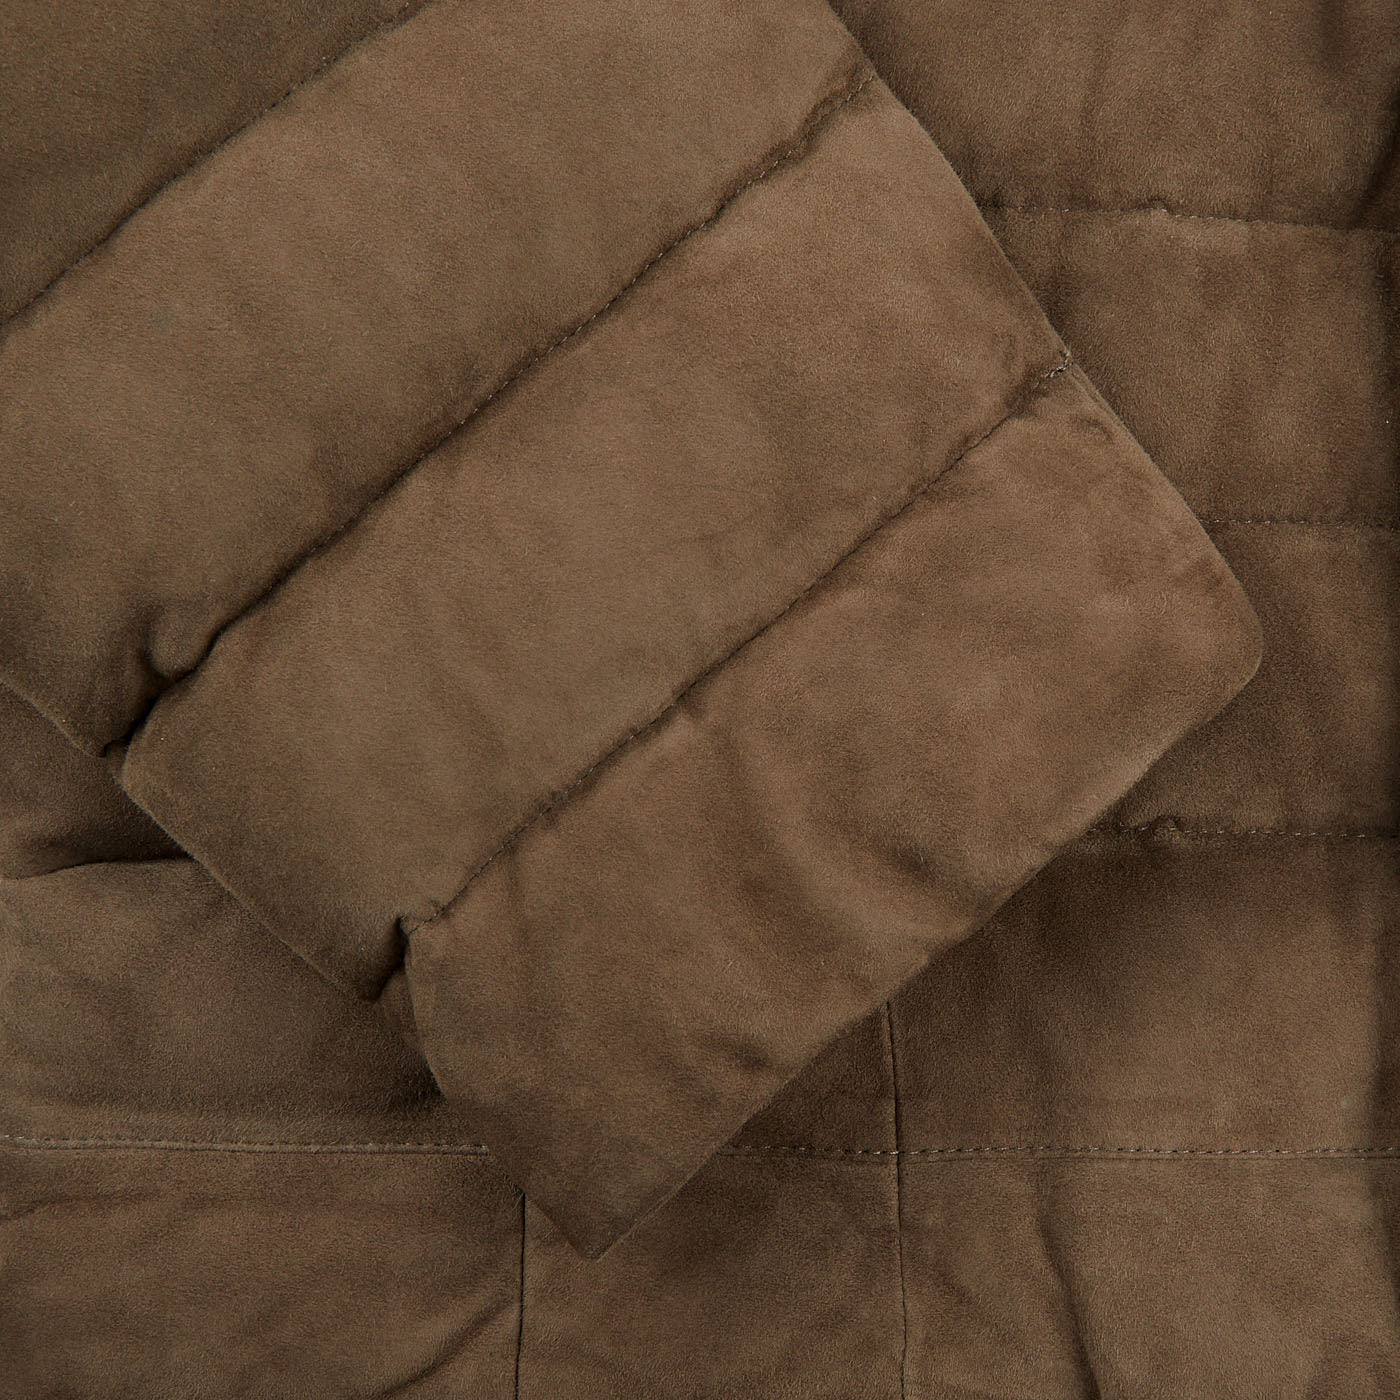 A close up of a dark taupe suede leather Moorer jacket showcasing expert craftsmanship.